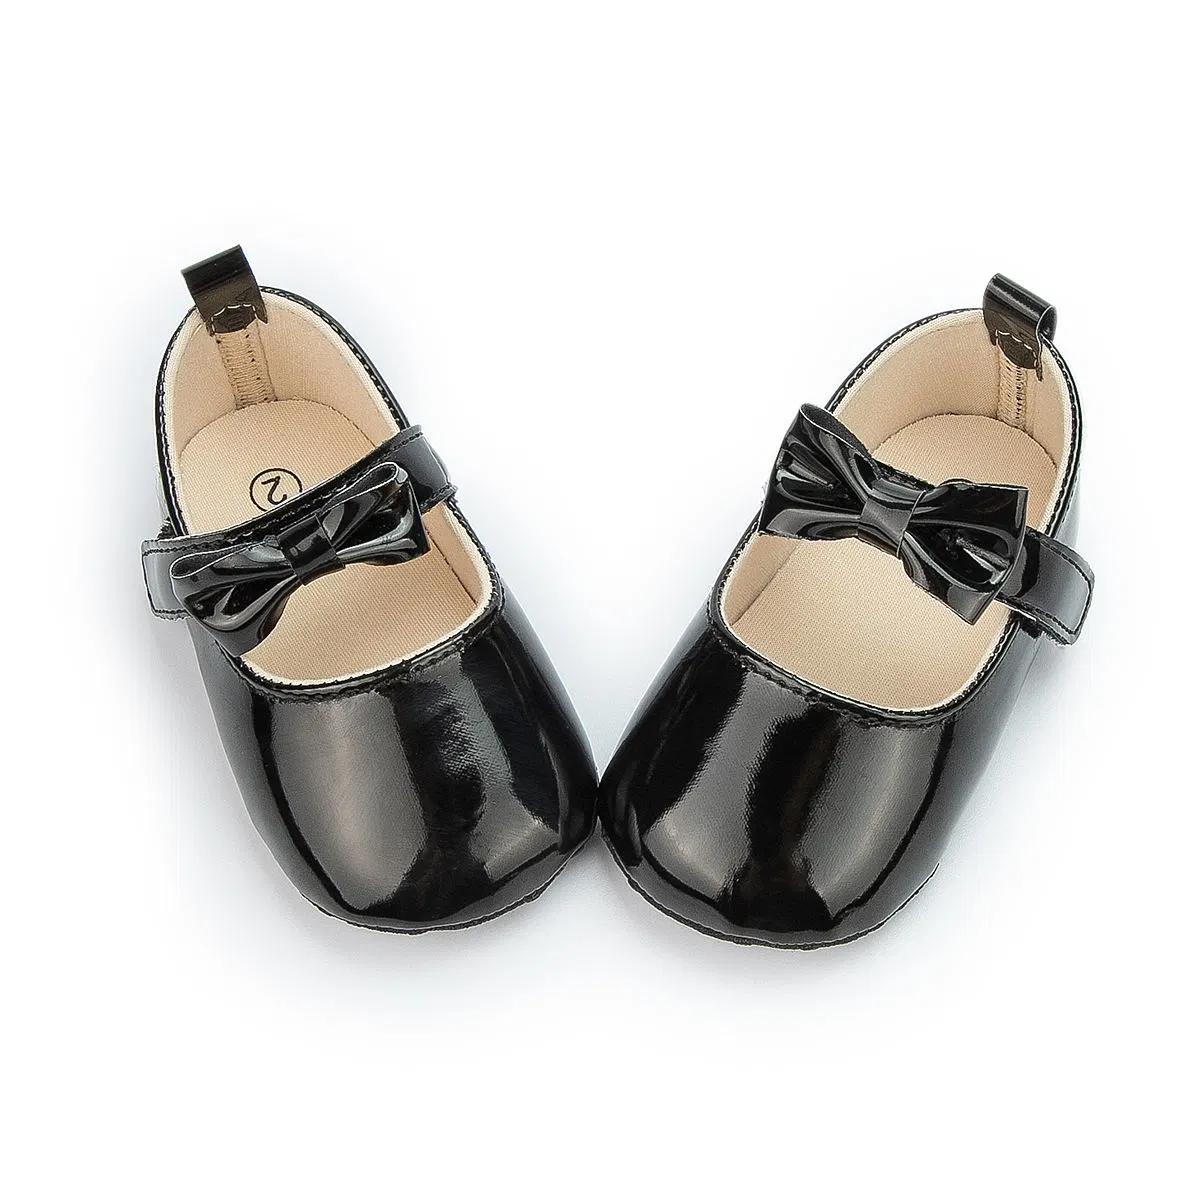 New Arrival Summer PU Leather Bowknot Dress 0-18 Months Prince Party Baby Girl Shoes